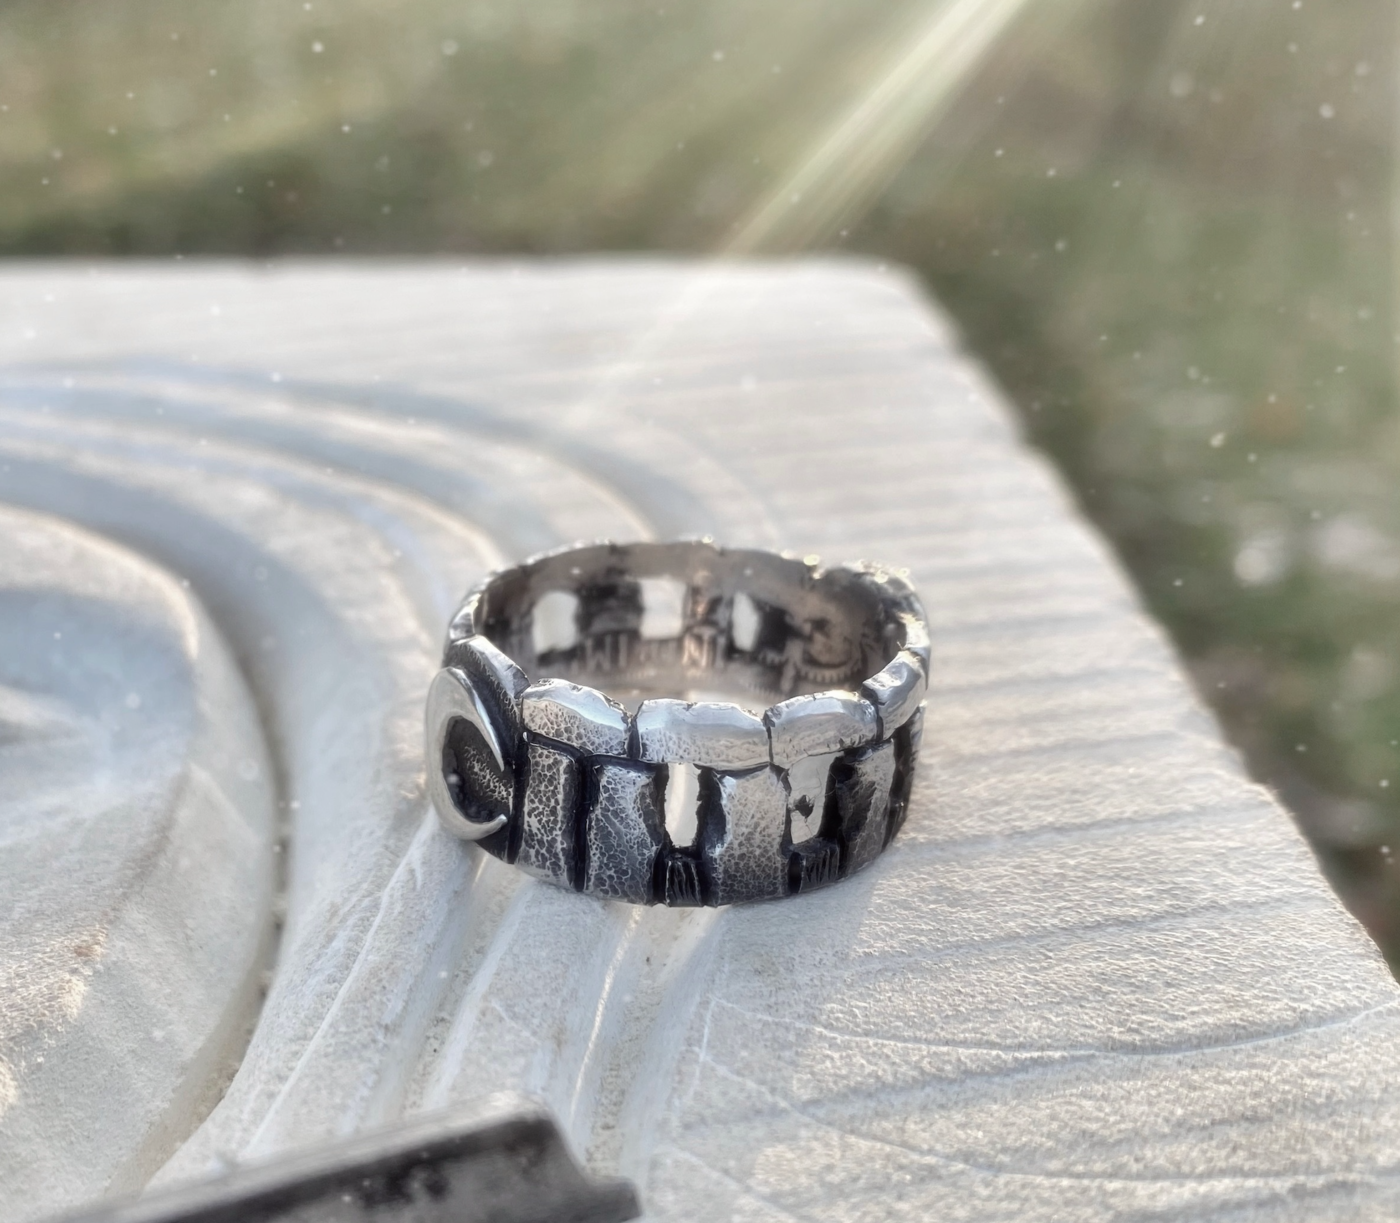 stonehenge ring handmade and handcrafted with traditional hand tools and techniques from a recycled silver coin